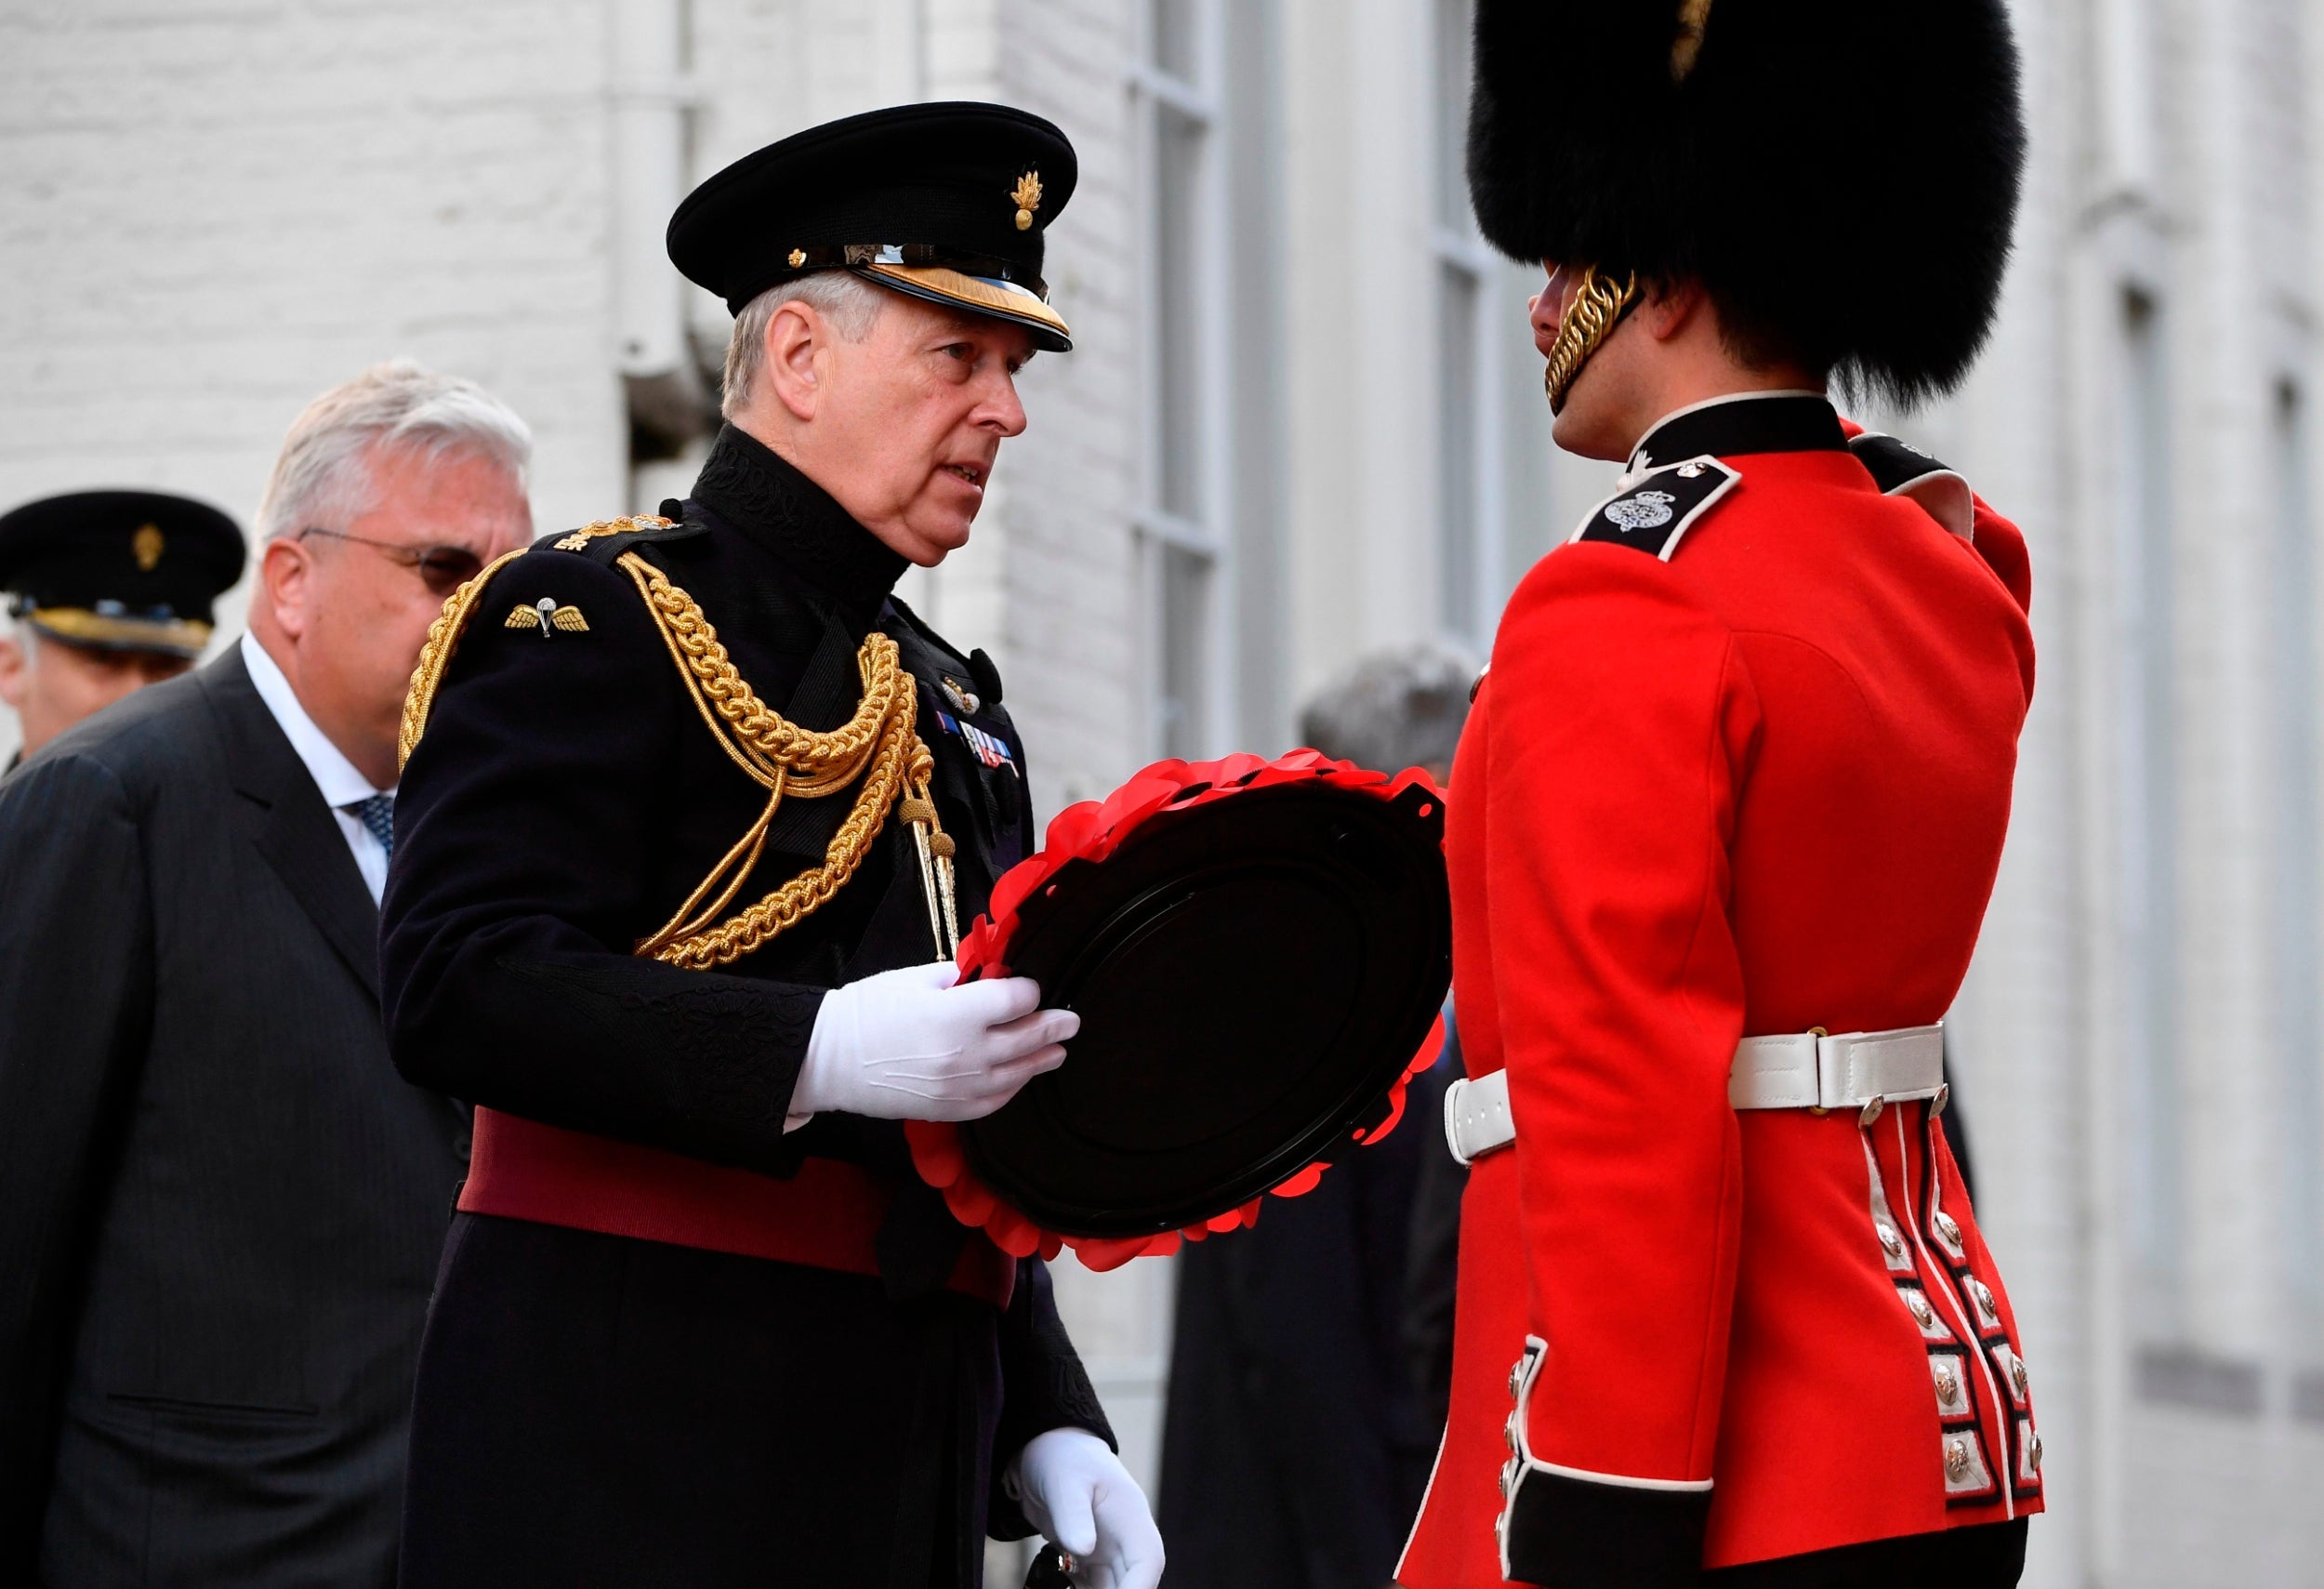 The Duke of York was present in his role as Colonel of the Grenadier Guards and laid a wreath at the Charles II memorial